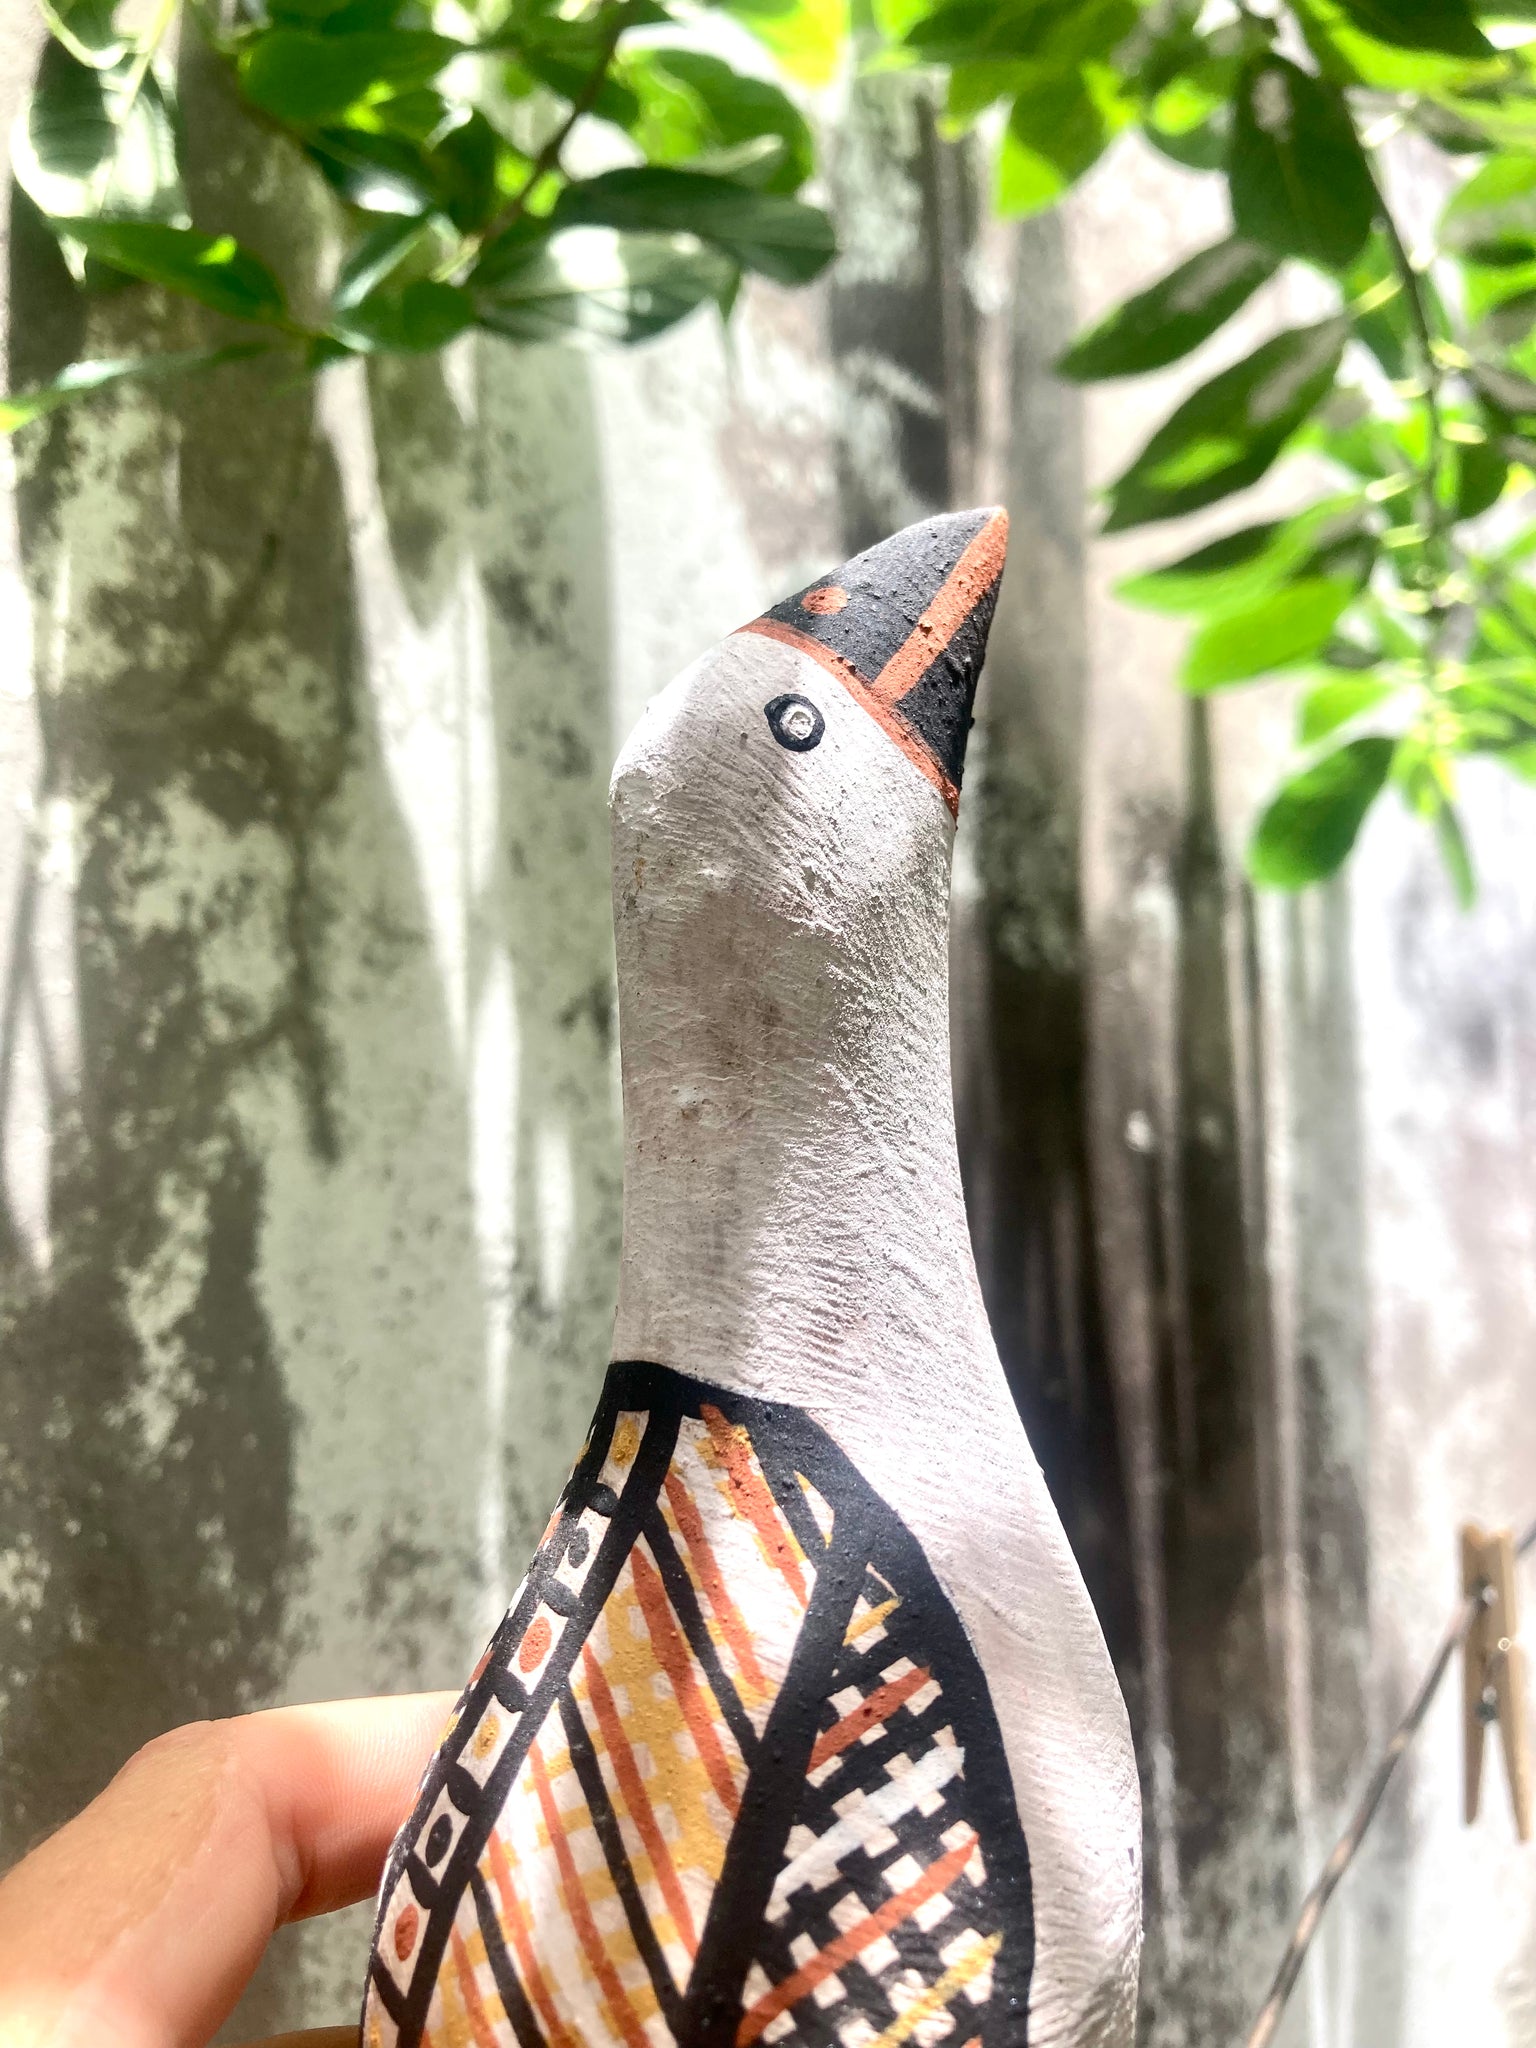 Hand-painted bird carving